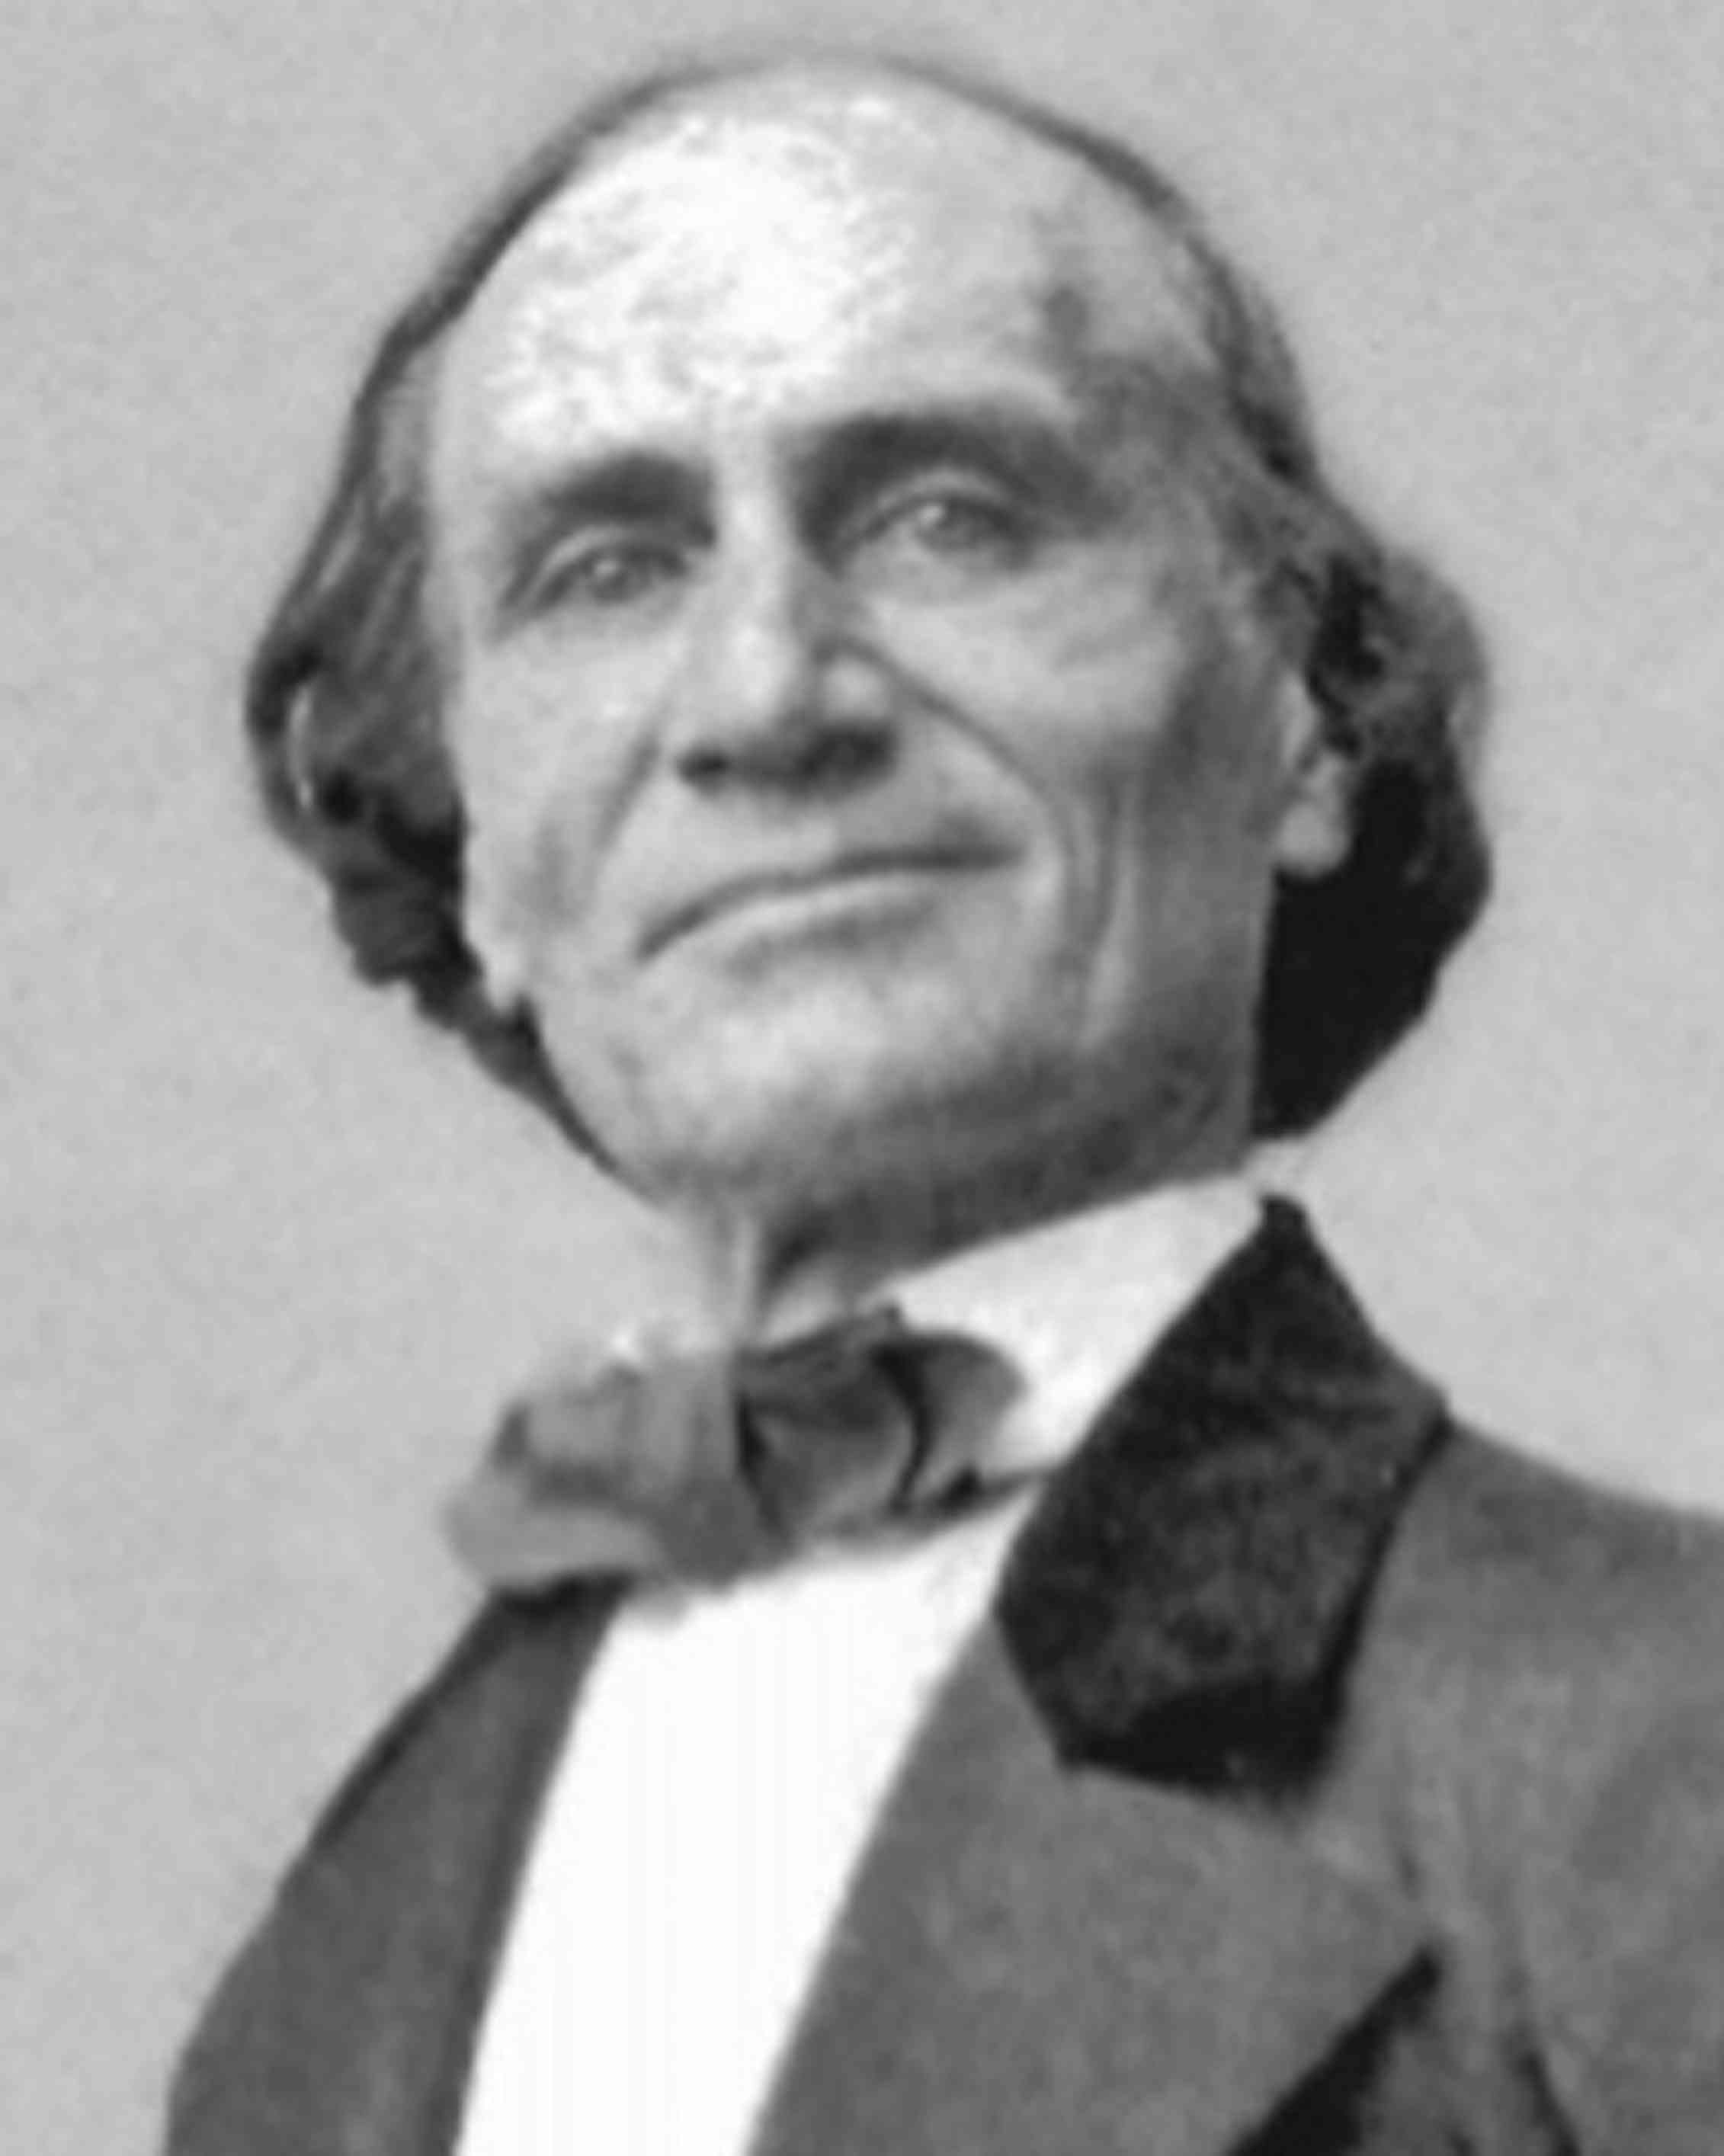 A black and white portrait of a man.